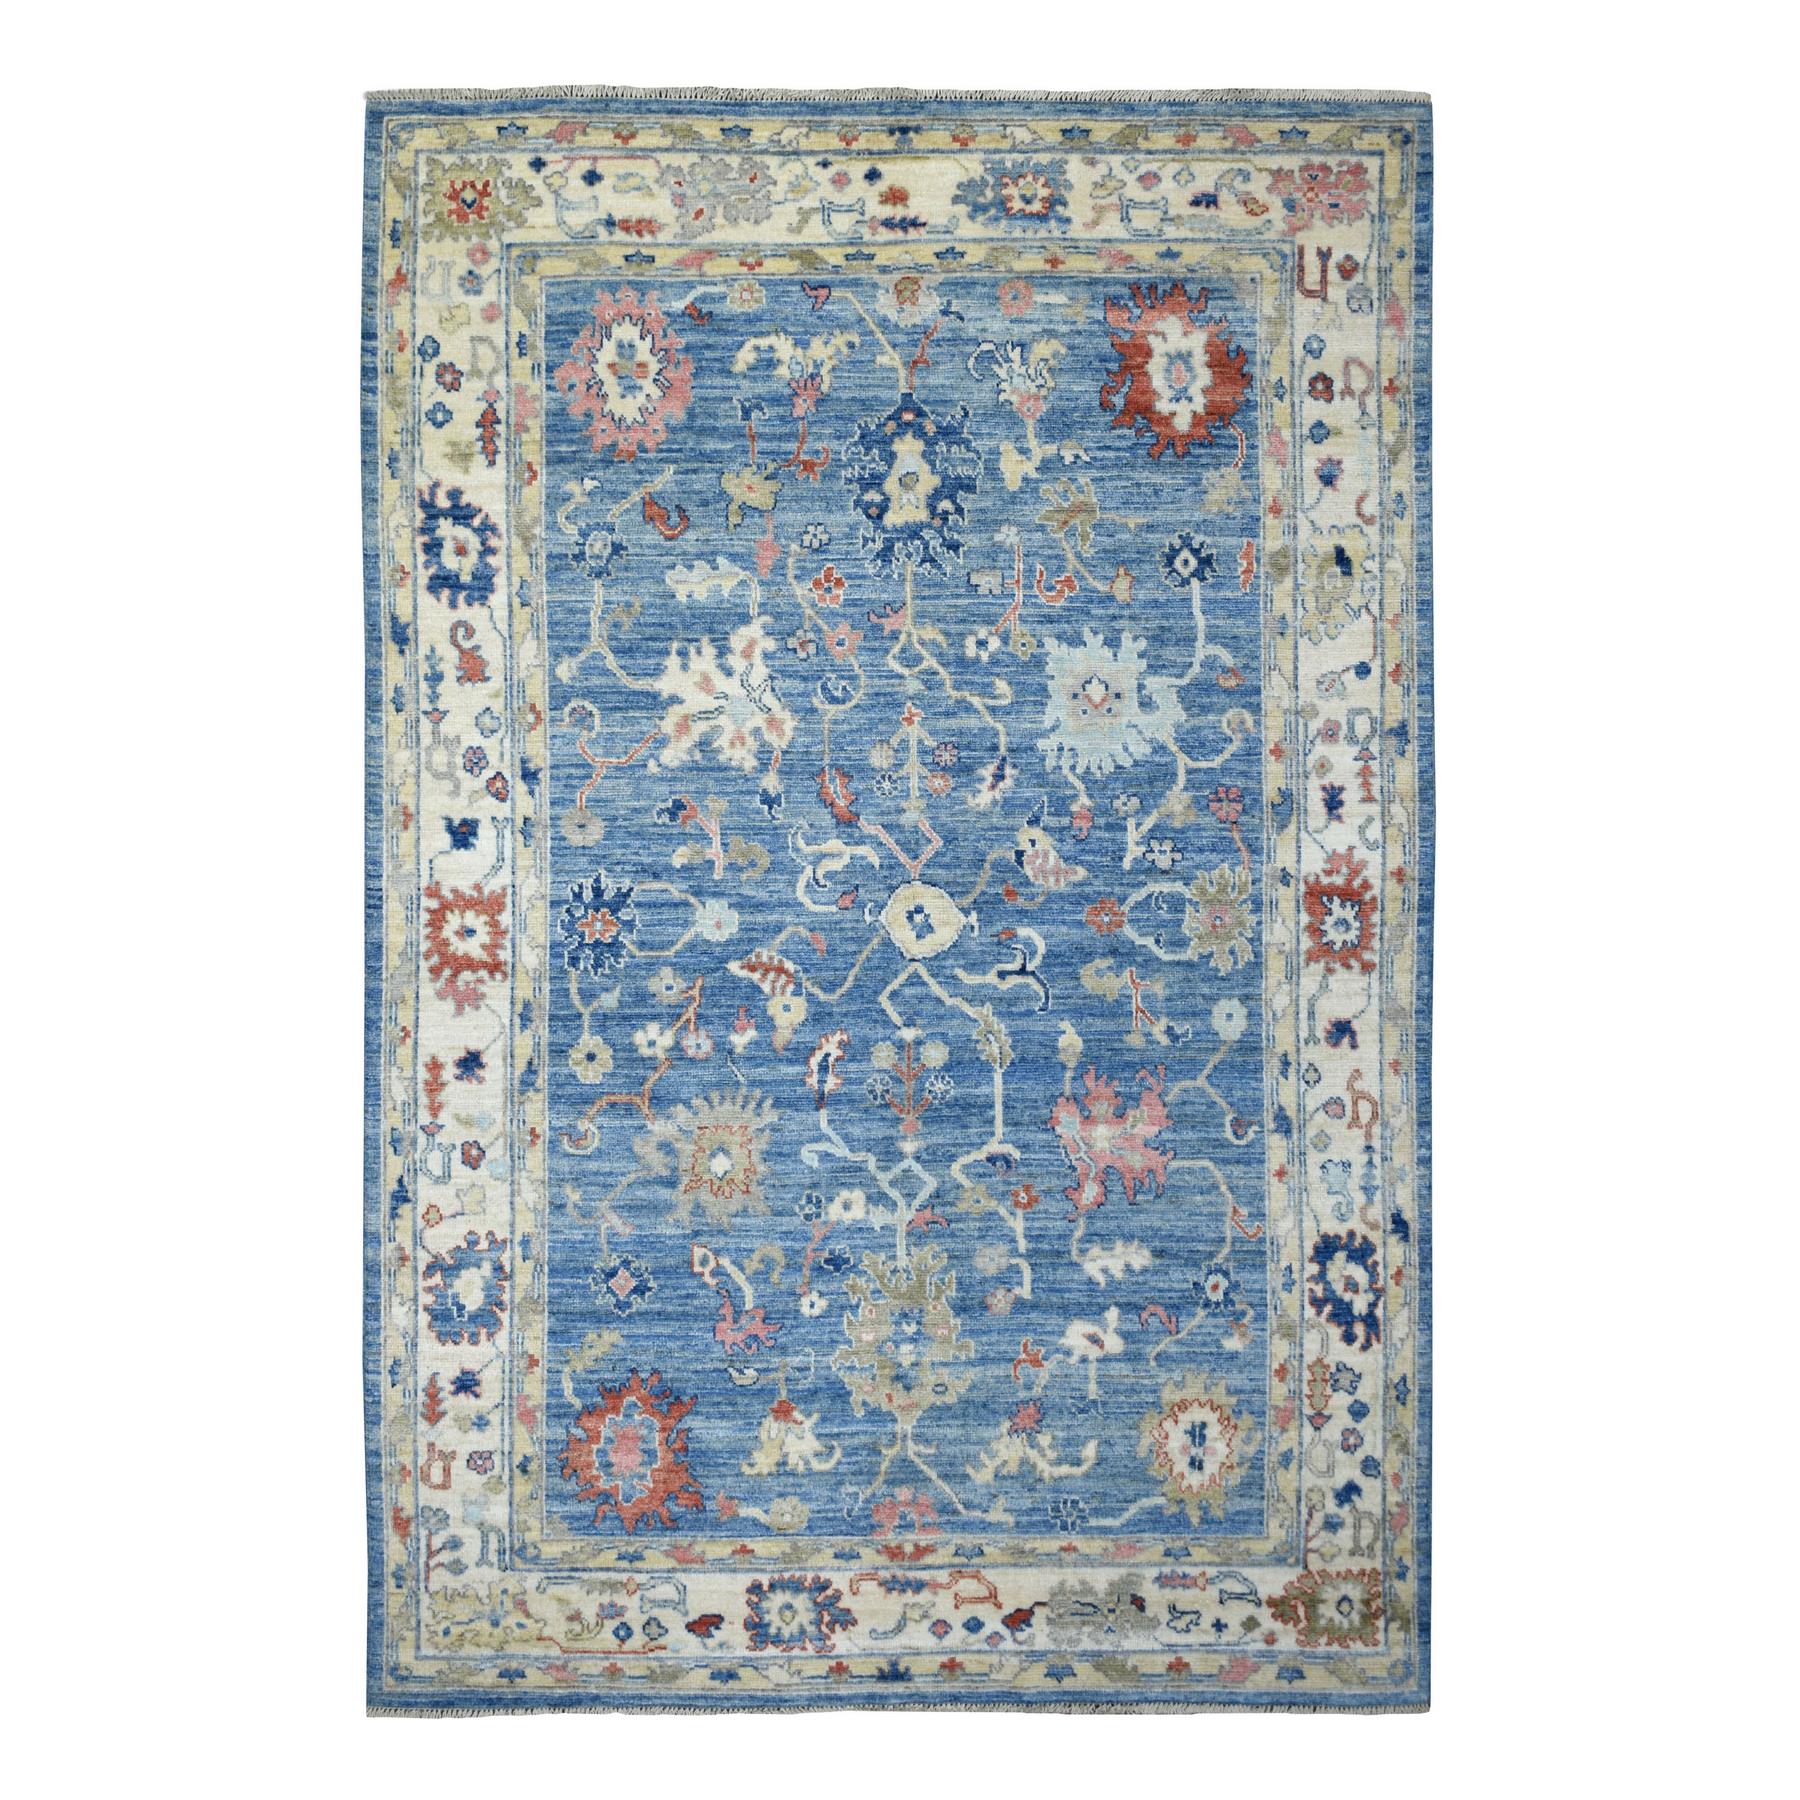 6'1"x8'10" Denim Blue Afghan Angora Oushak with Colorful Leaf Design, Hand Woven, Soft and Shiny Wool Oriental Rug 